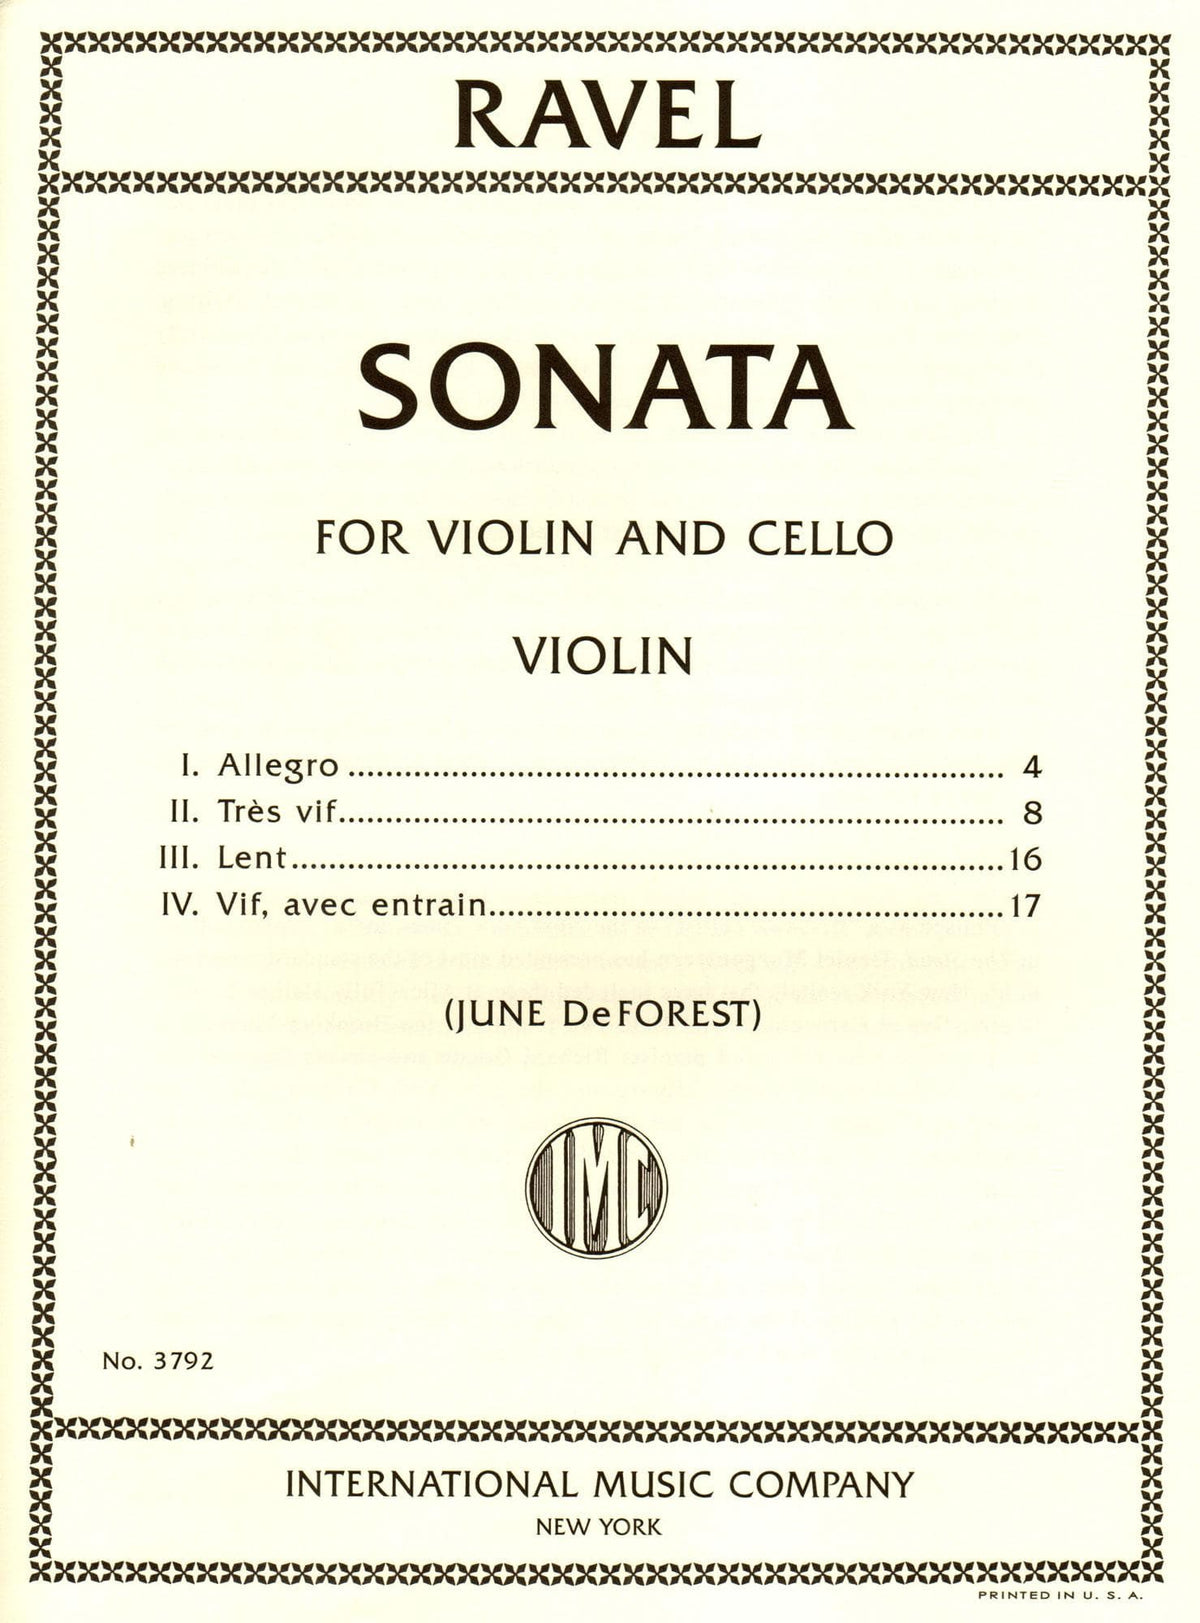 Ravel, Maurice - Sonata for Violin and Cello - edited by June DeForest - International Music Company